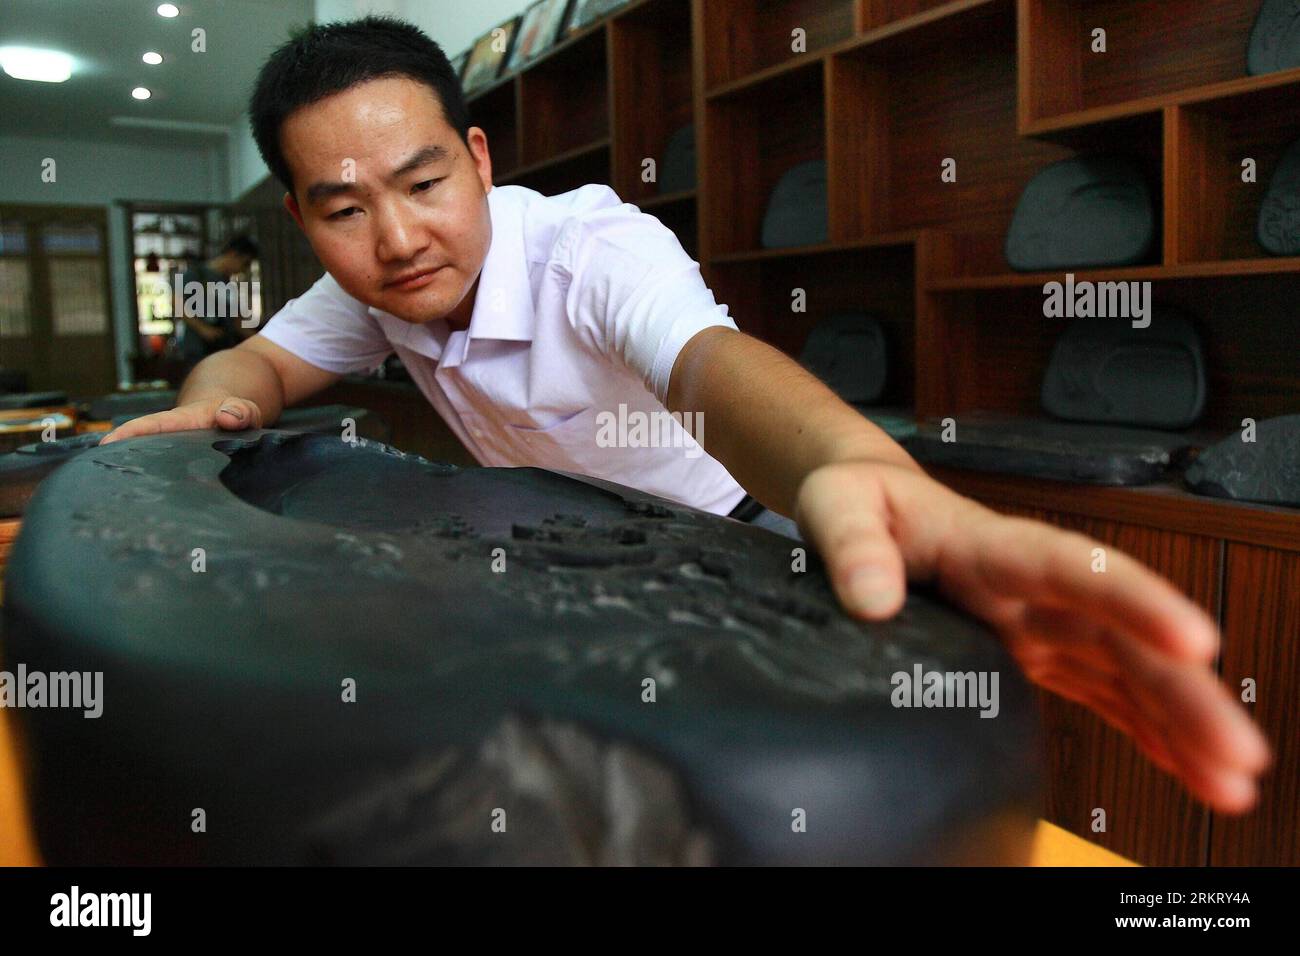 Bildnummer: 58328552  Datum: 07.08.2012  Copyright: imago/Xinhua (120809) -- SHEXIAN, Aug. 9, 2012 (Xinhua) -- Wen Xin examines an inkstone carving in the showroom in Shexian County of east China s Anhui Province, Aug. 7, 2012. Wen Xin, a 32-year-old man, is a master of inkstone carving in Shexian of Anhui Province. He started to learn the craftsmanship during his teenage years under the influence of his family. After years of study as research, Wen Xin developed a series of skills and patterns in carving the inkstone. The themes of his inkstones, various from landscapes, portrait, flowers to Stock Photo